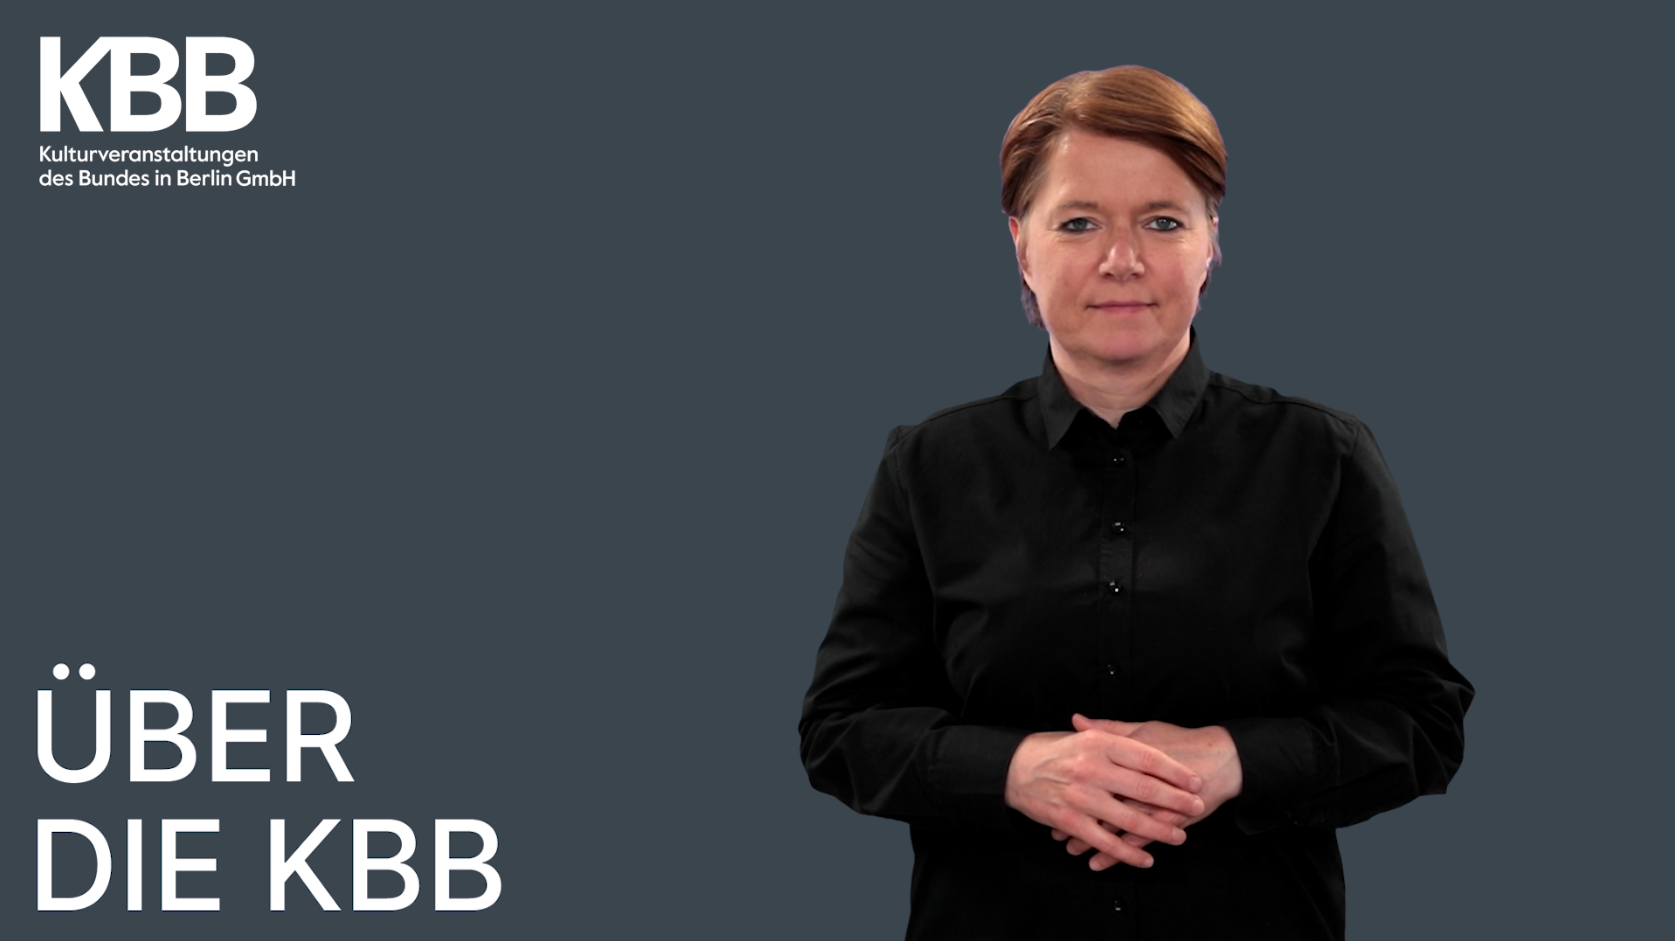 The translator Katja Fischer in front of a grey background. The words "About KBB" are superimposed on the bottom left.